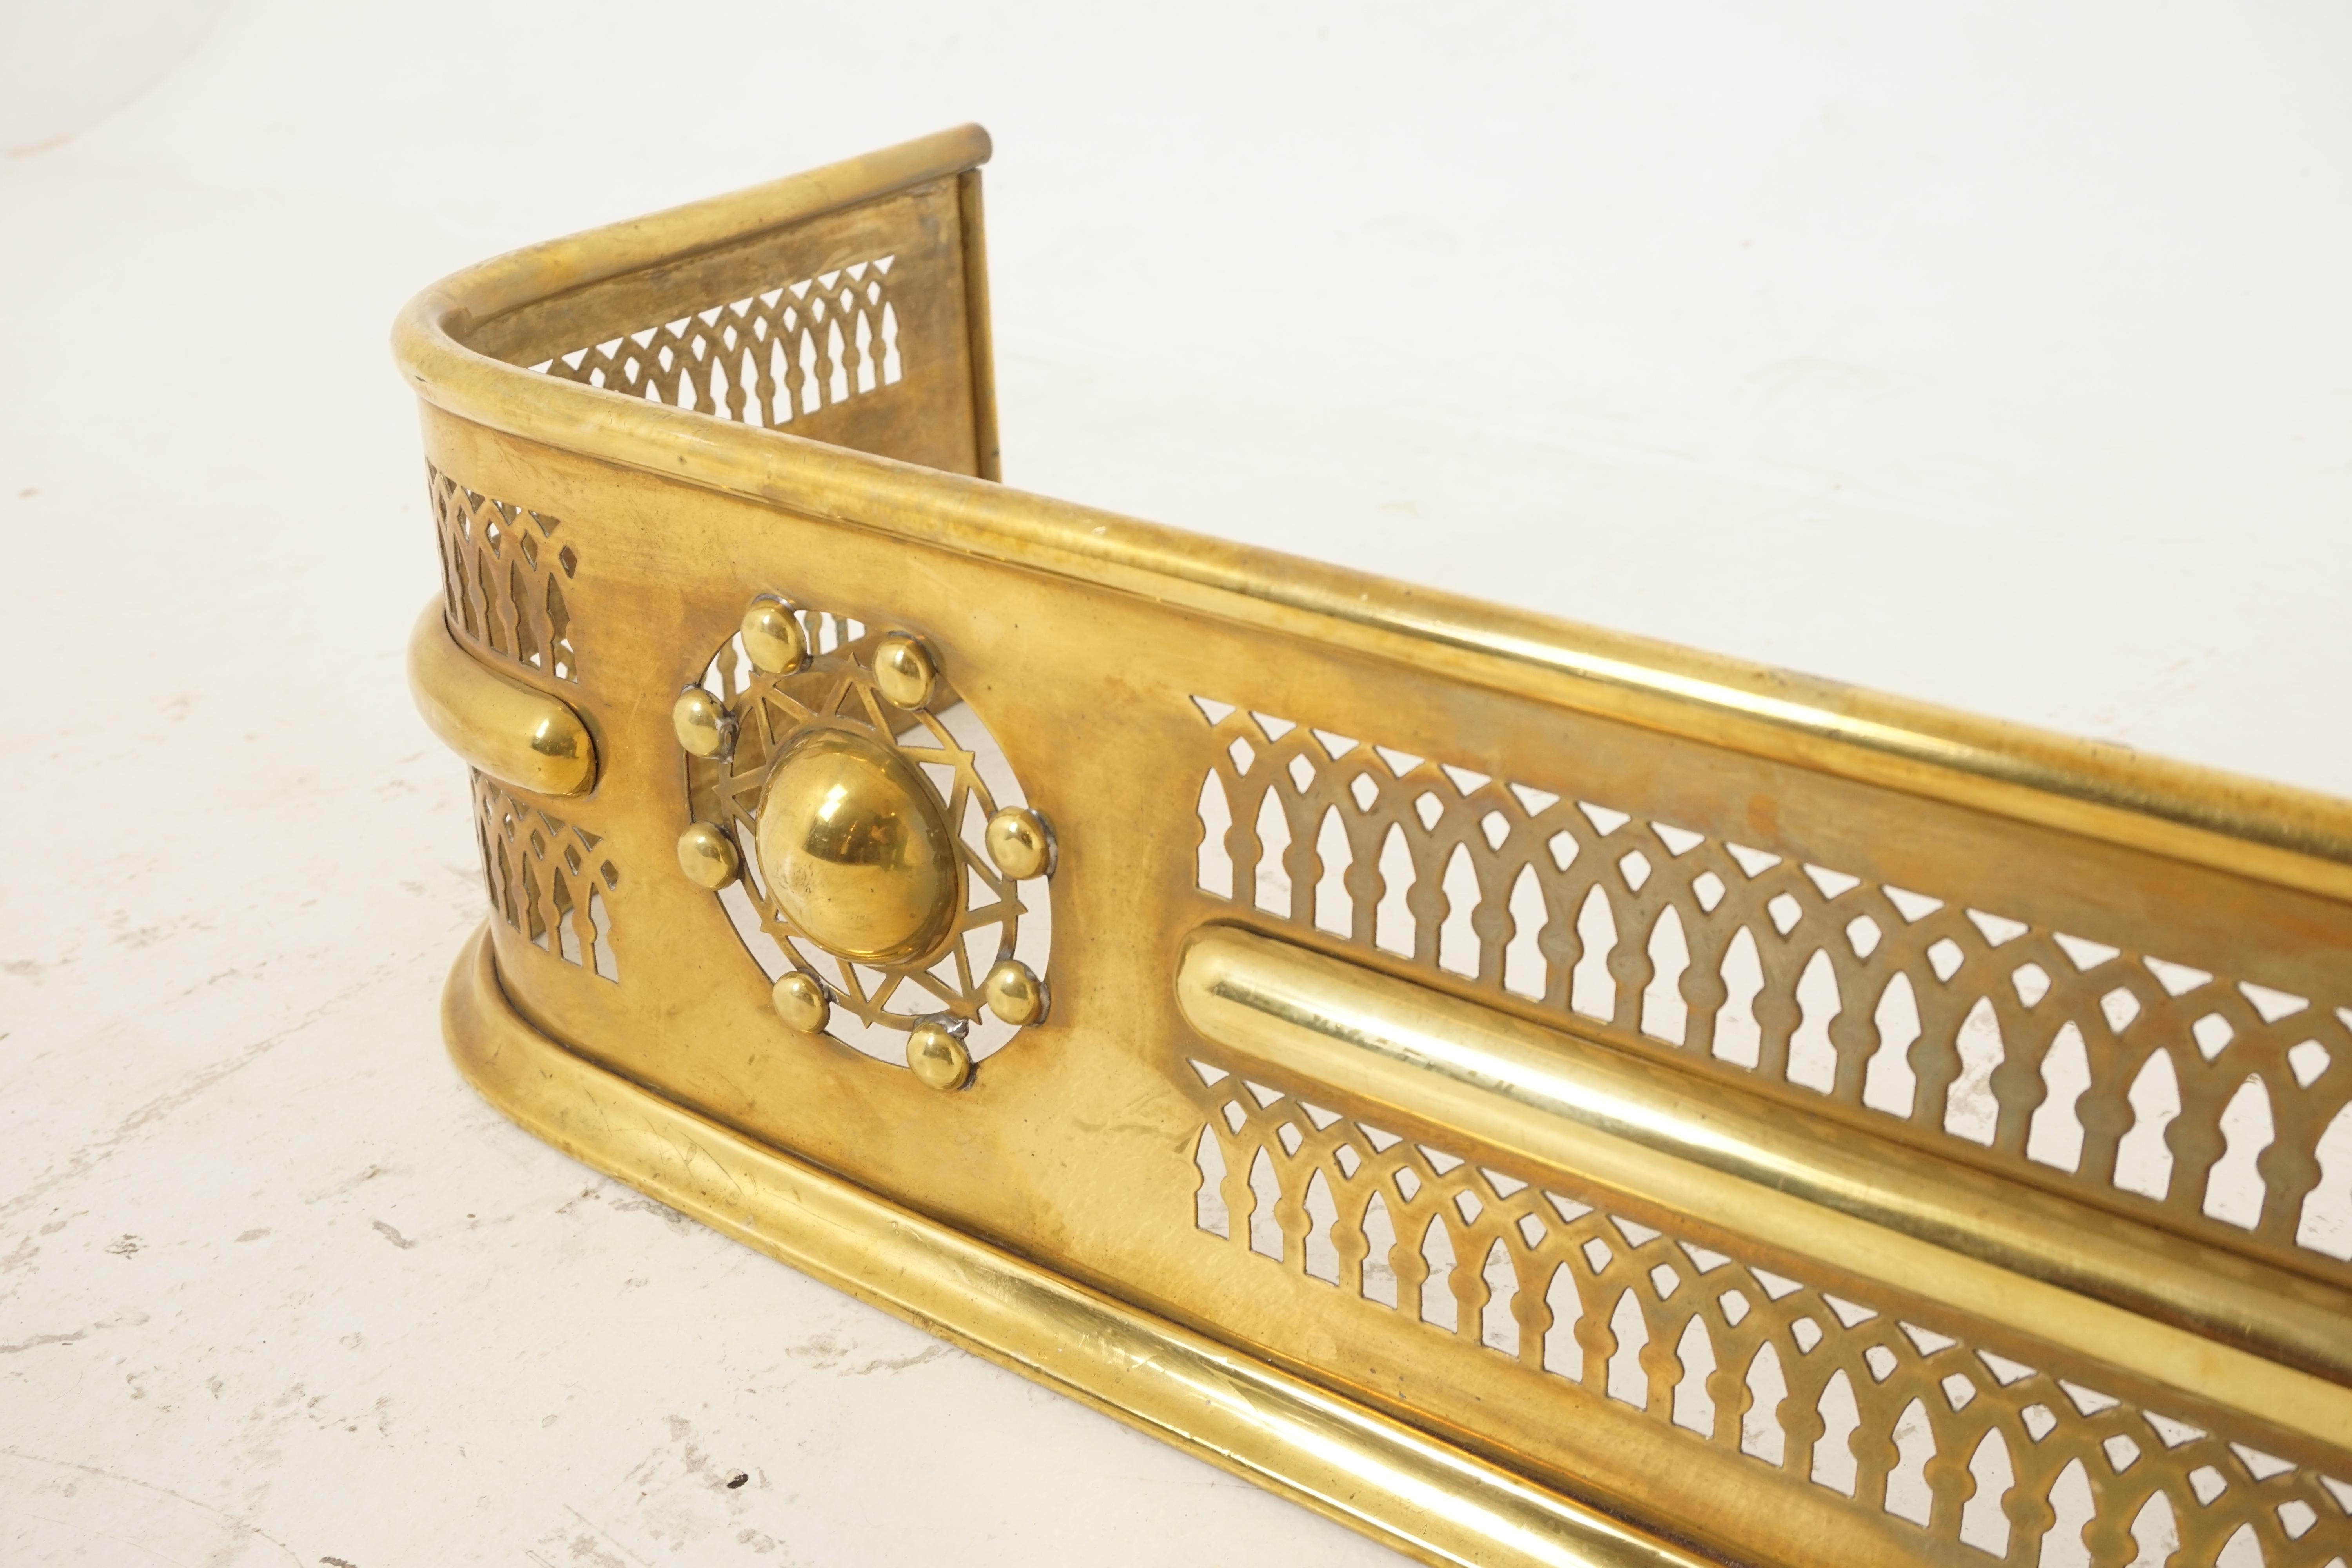 Hand-Crafted Antique Brass Fireplace Surround, Fender Hearth Guard, Scotland, 1900